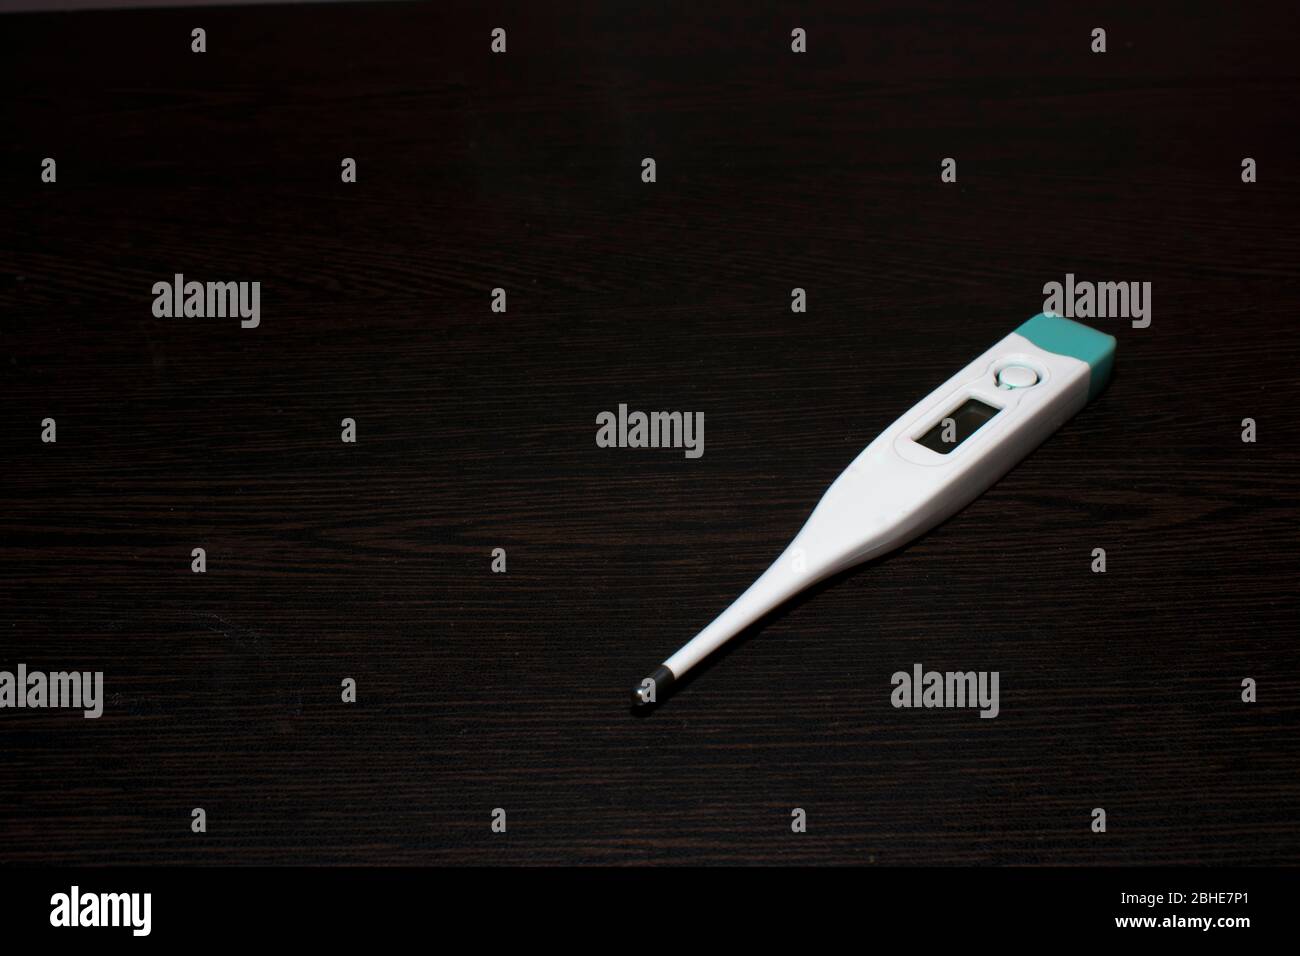 Digital Thermometer on black background to check body temperature Stock Photo